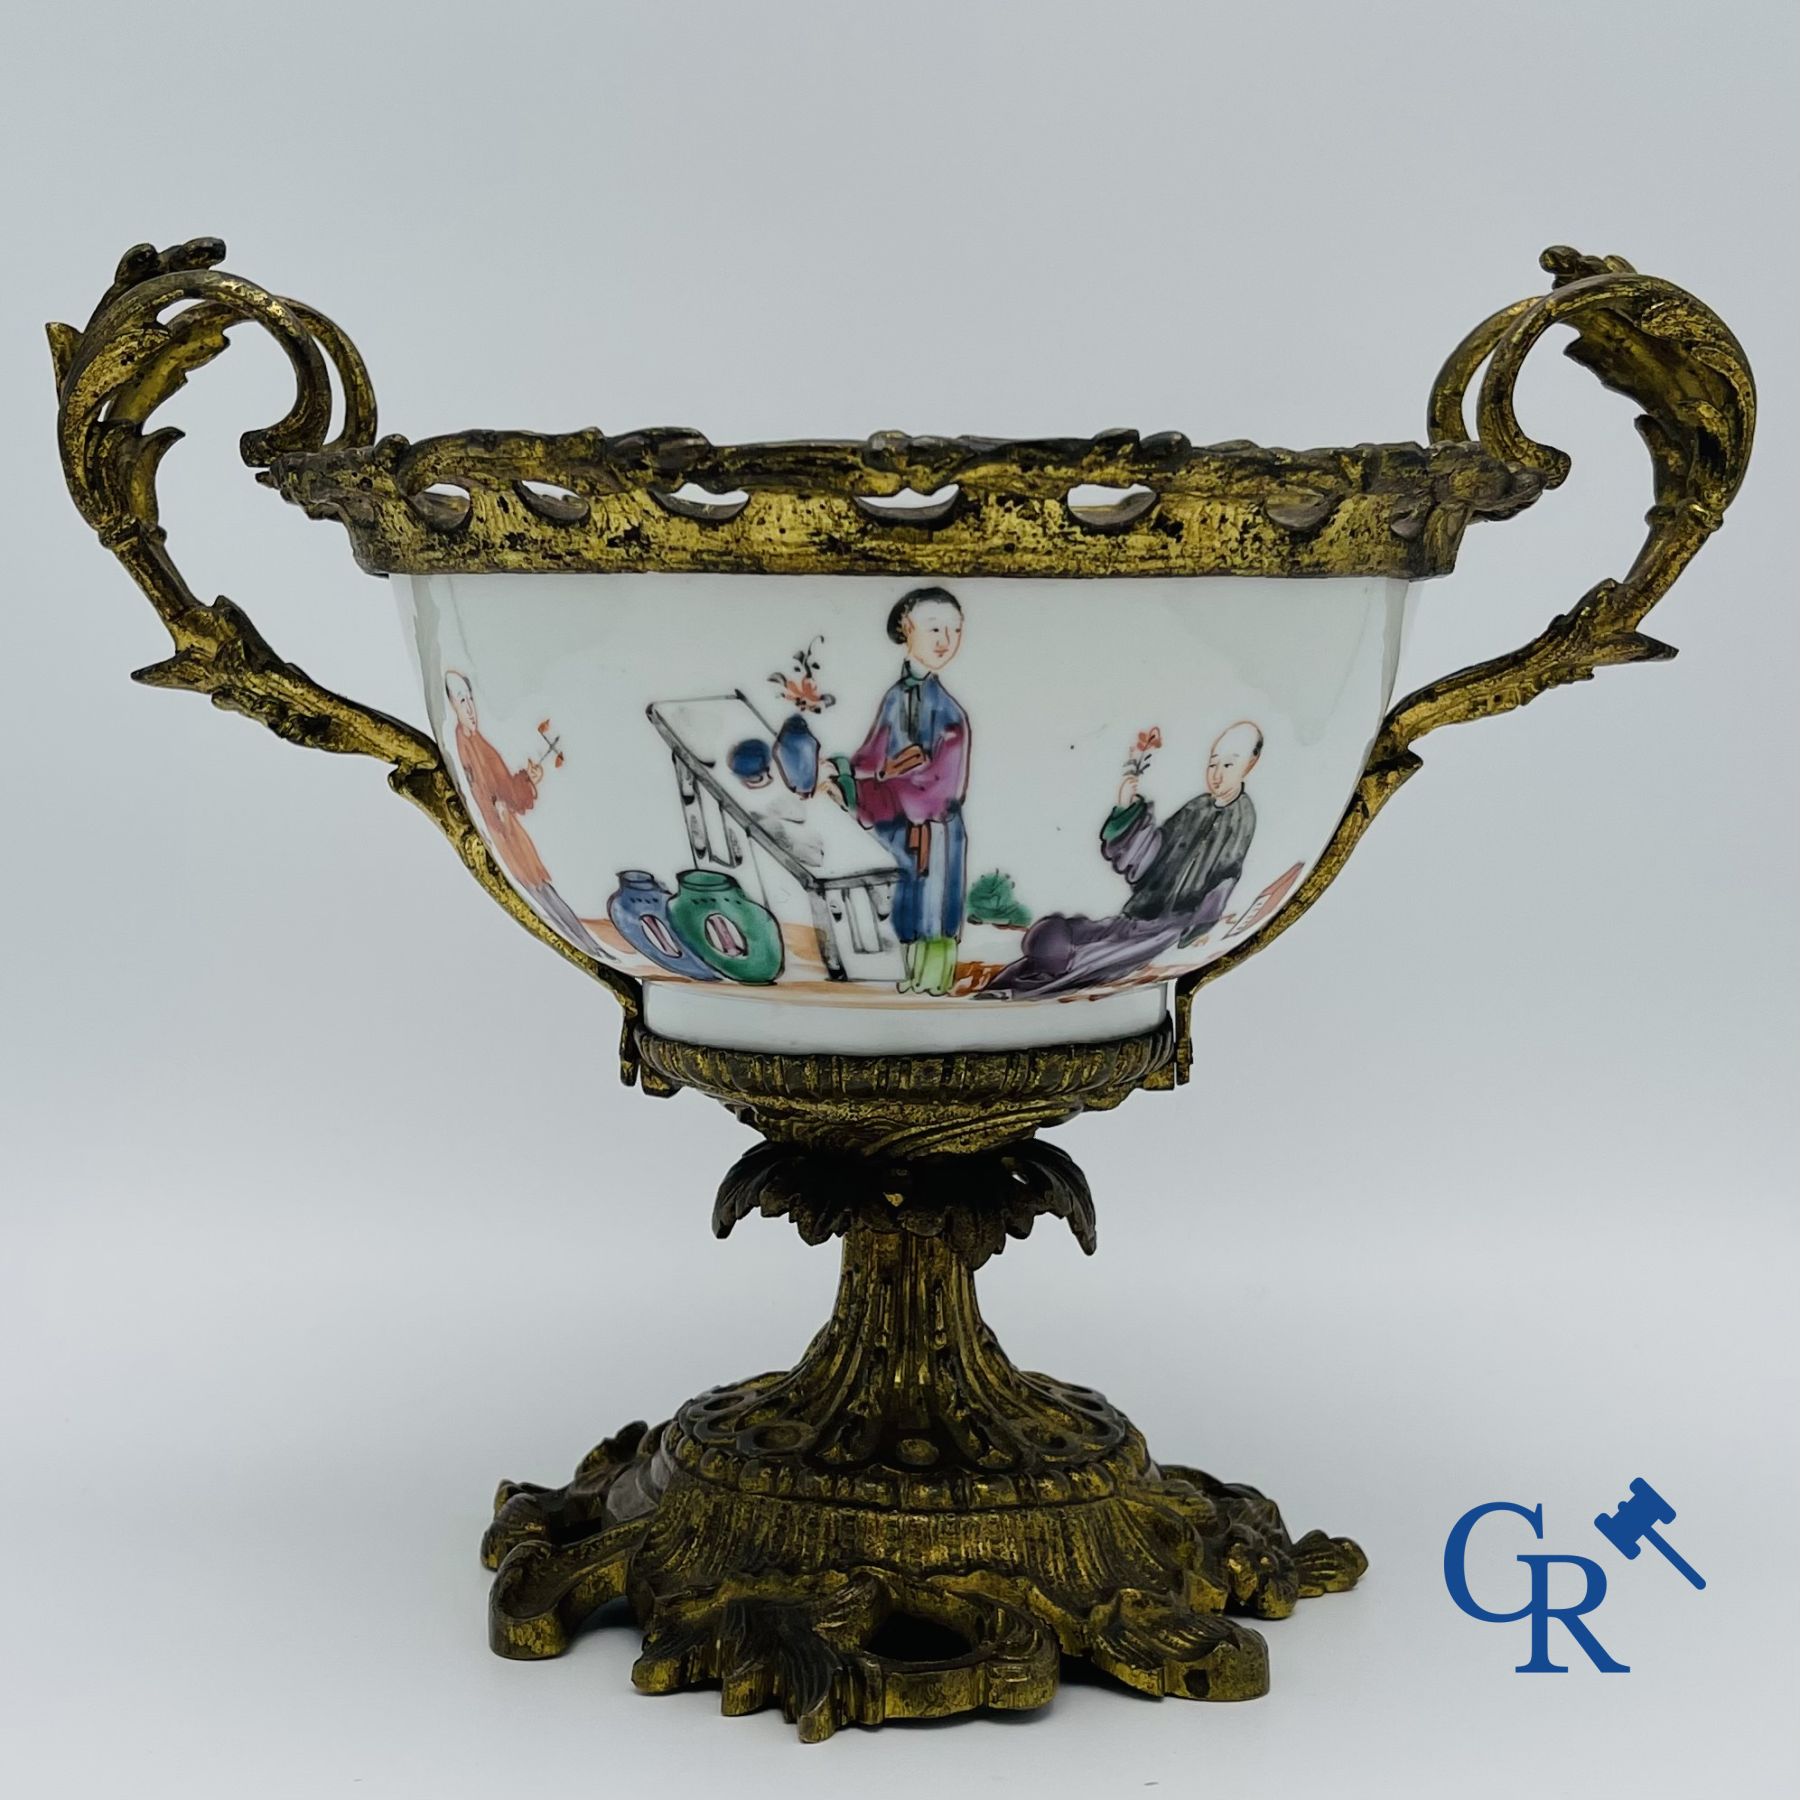 Chinese porcelain: An 18th century gilt-bronze mounted bowl in Chinese export porcelain.